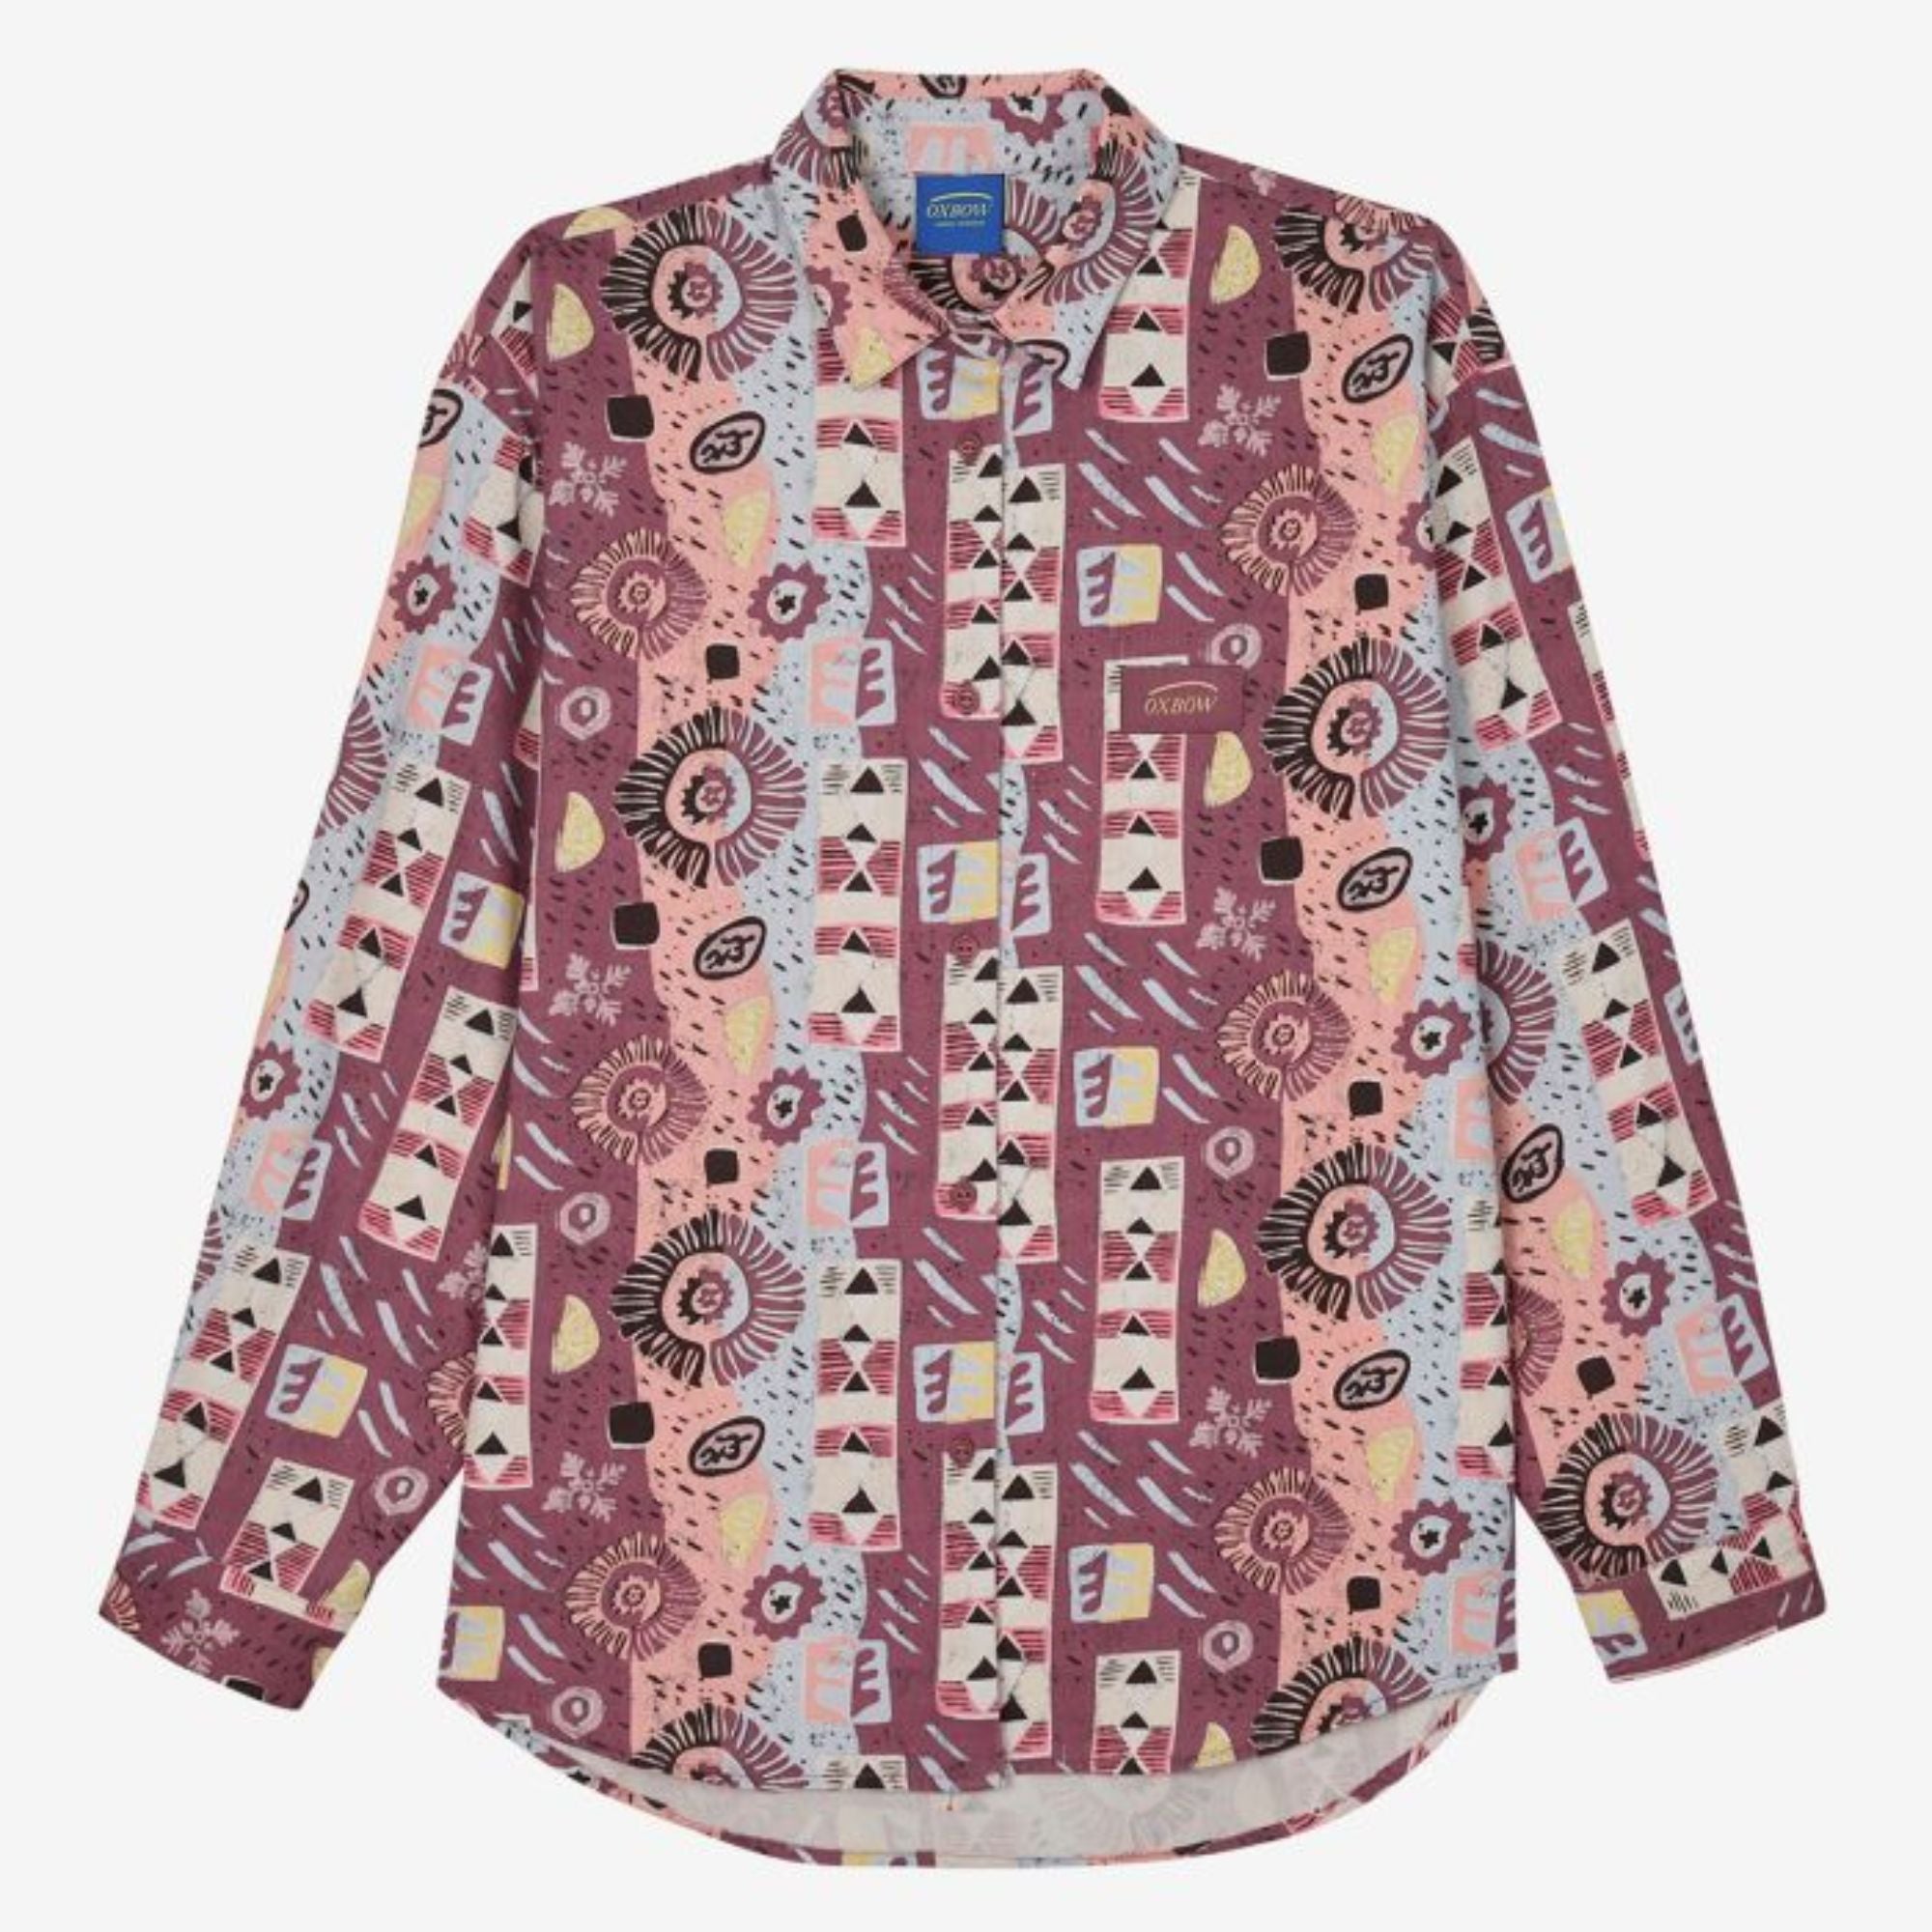 Oxbow Women's Chinza Shirt | OXBOW | Portwest - The Outdoor Shop